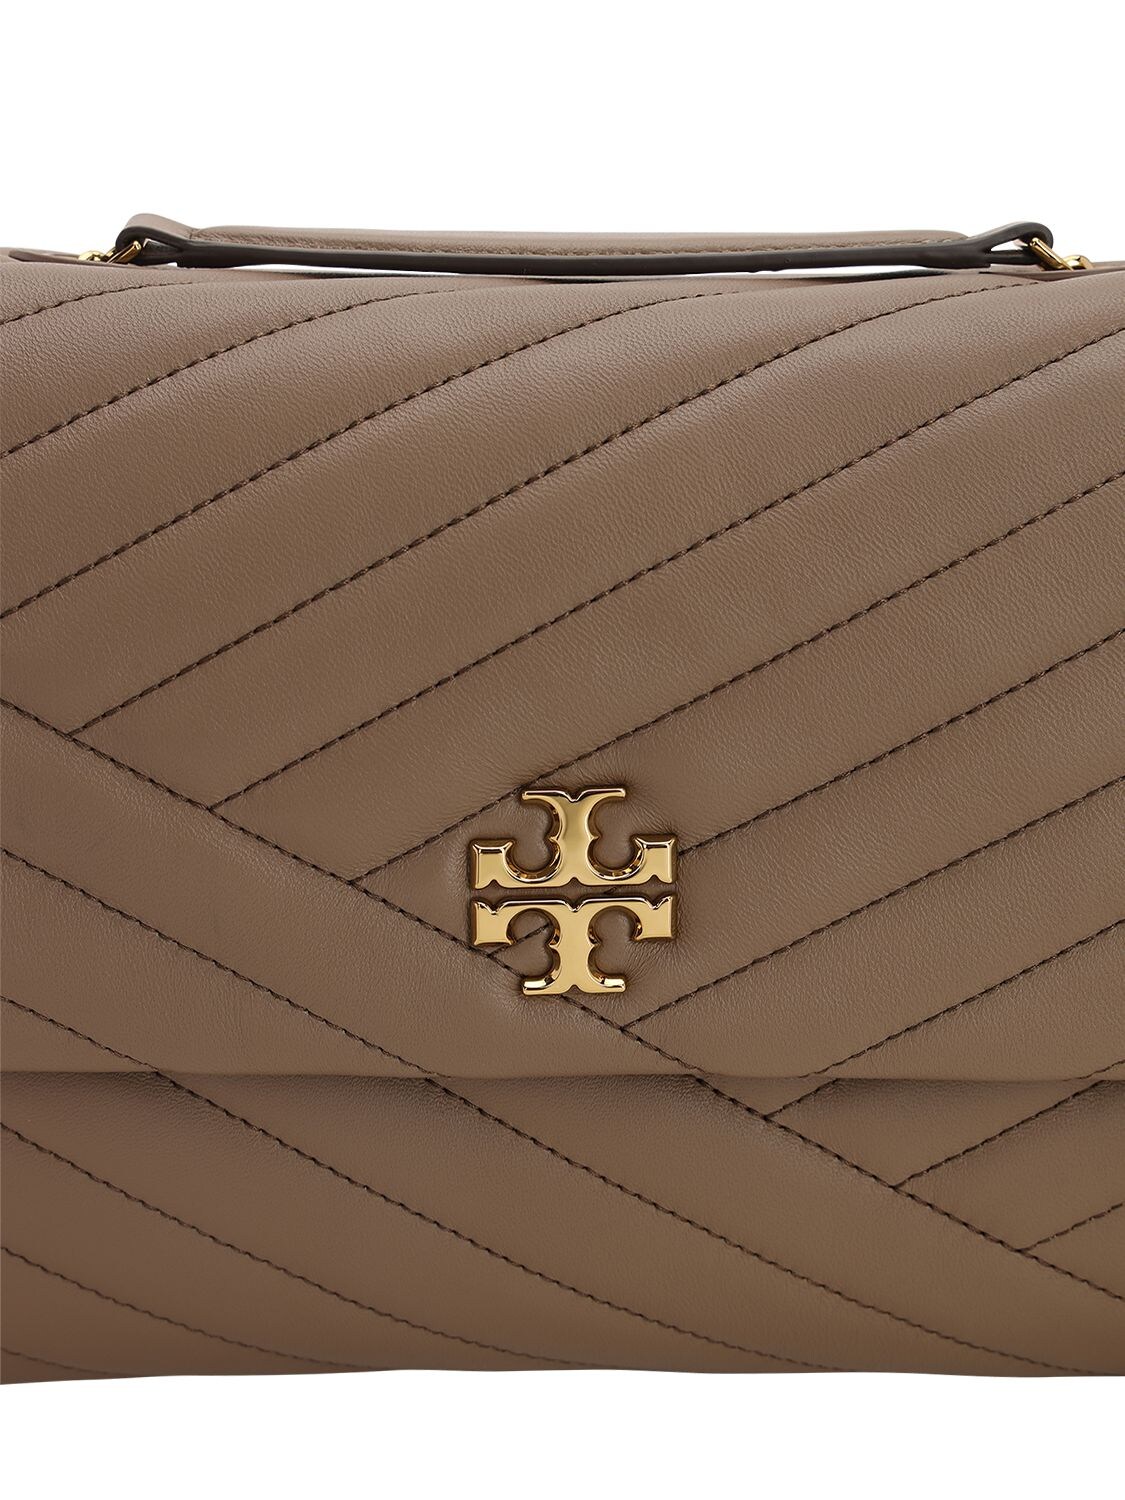 Tory Burch Kira Chevron Quilted Leather Shoulder Bag - Brown In 294 Classic Taupe | ModeSens